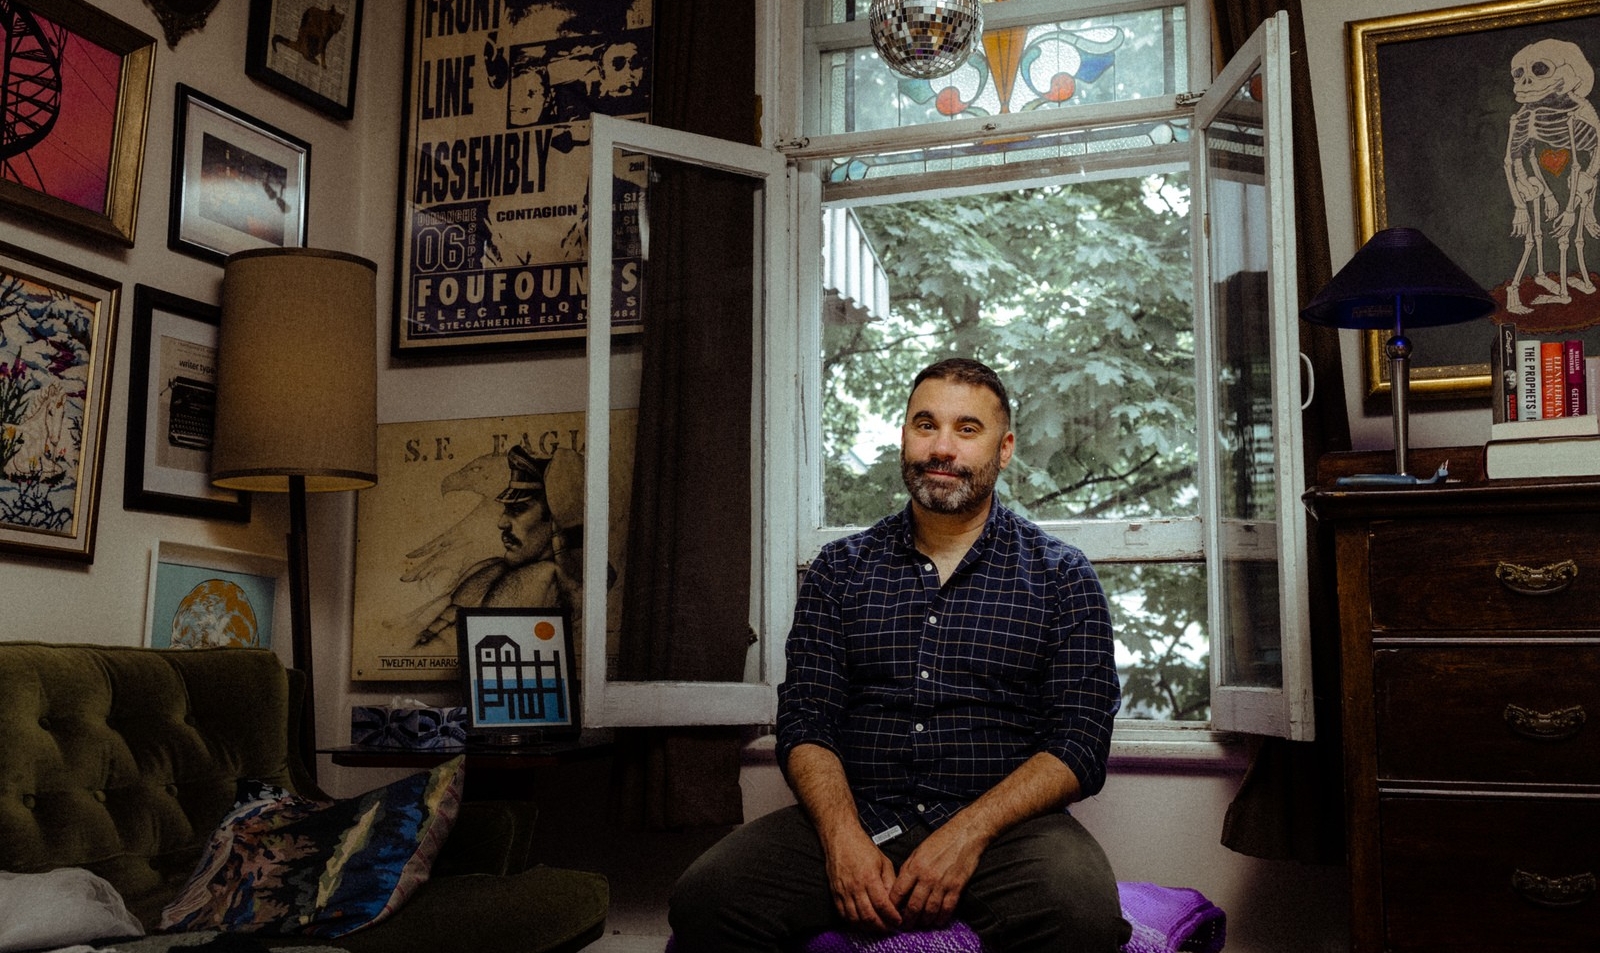 Image of a man with short dark hair and beard sitting in front of an open window in a room with walls covered in photographs and art